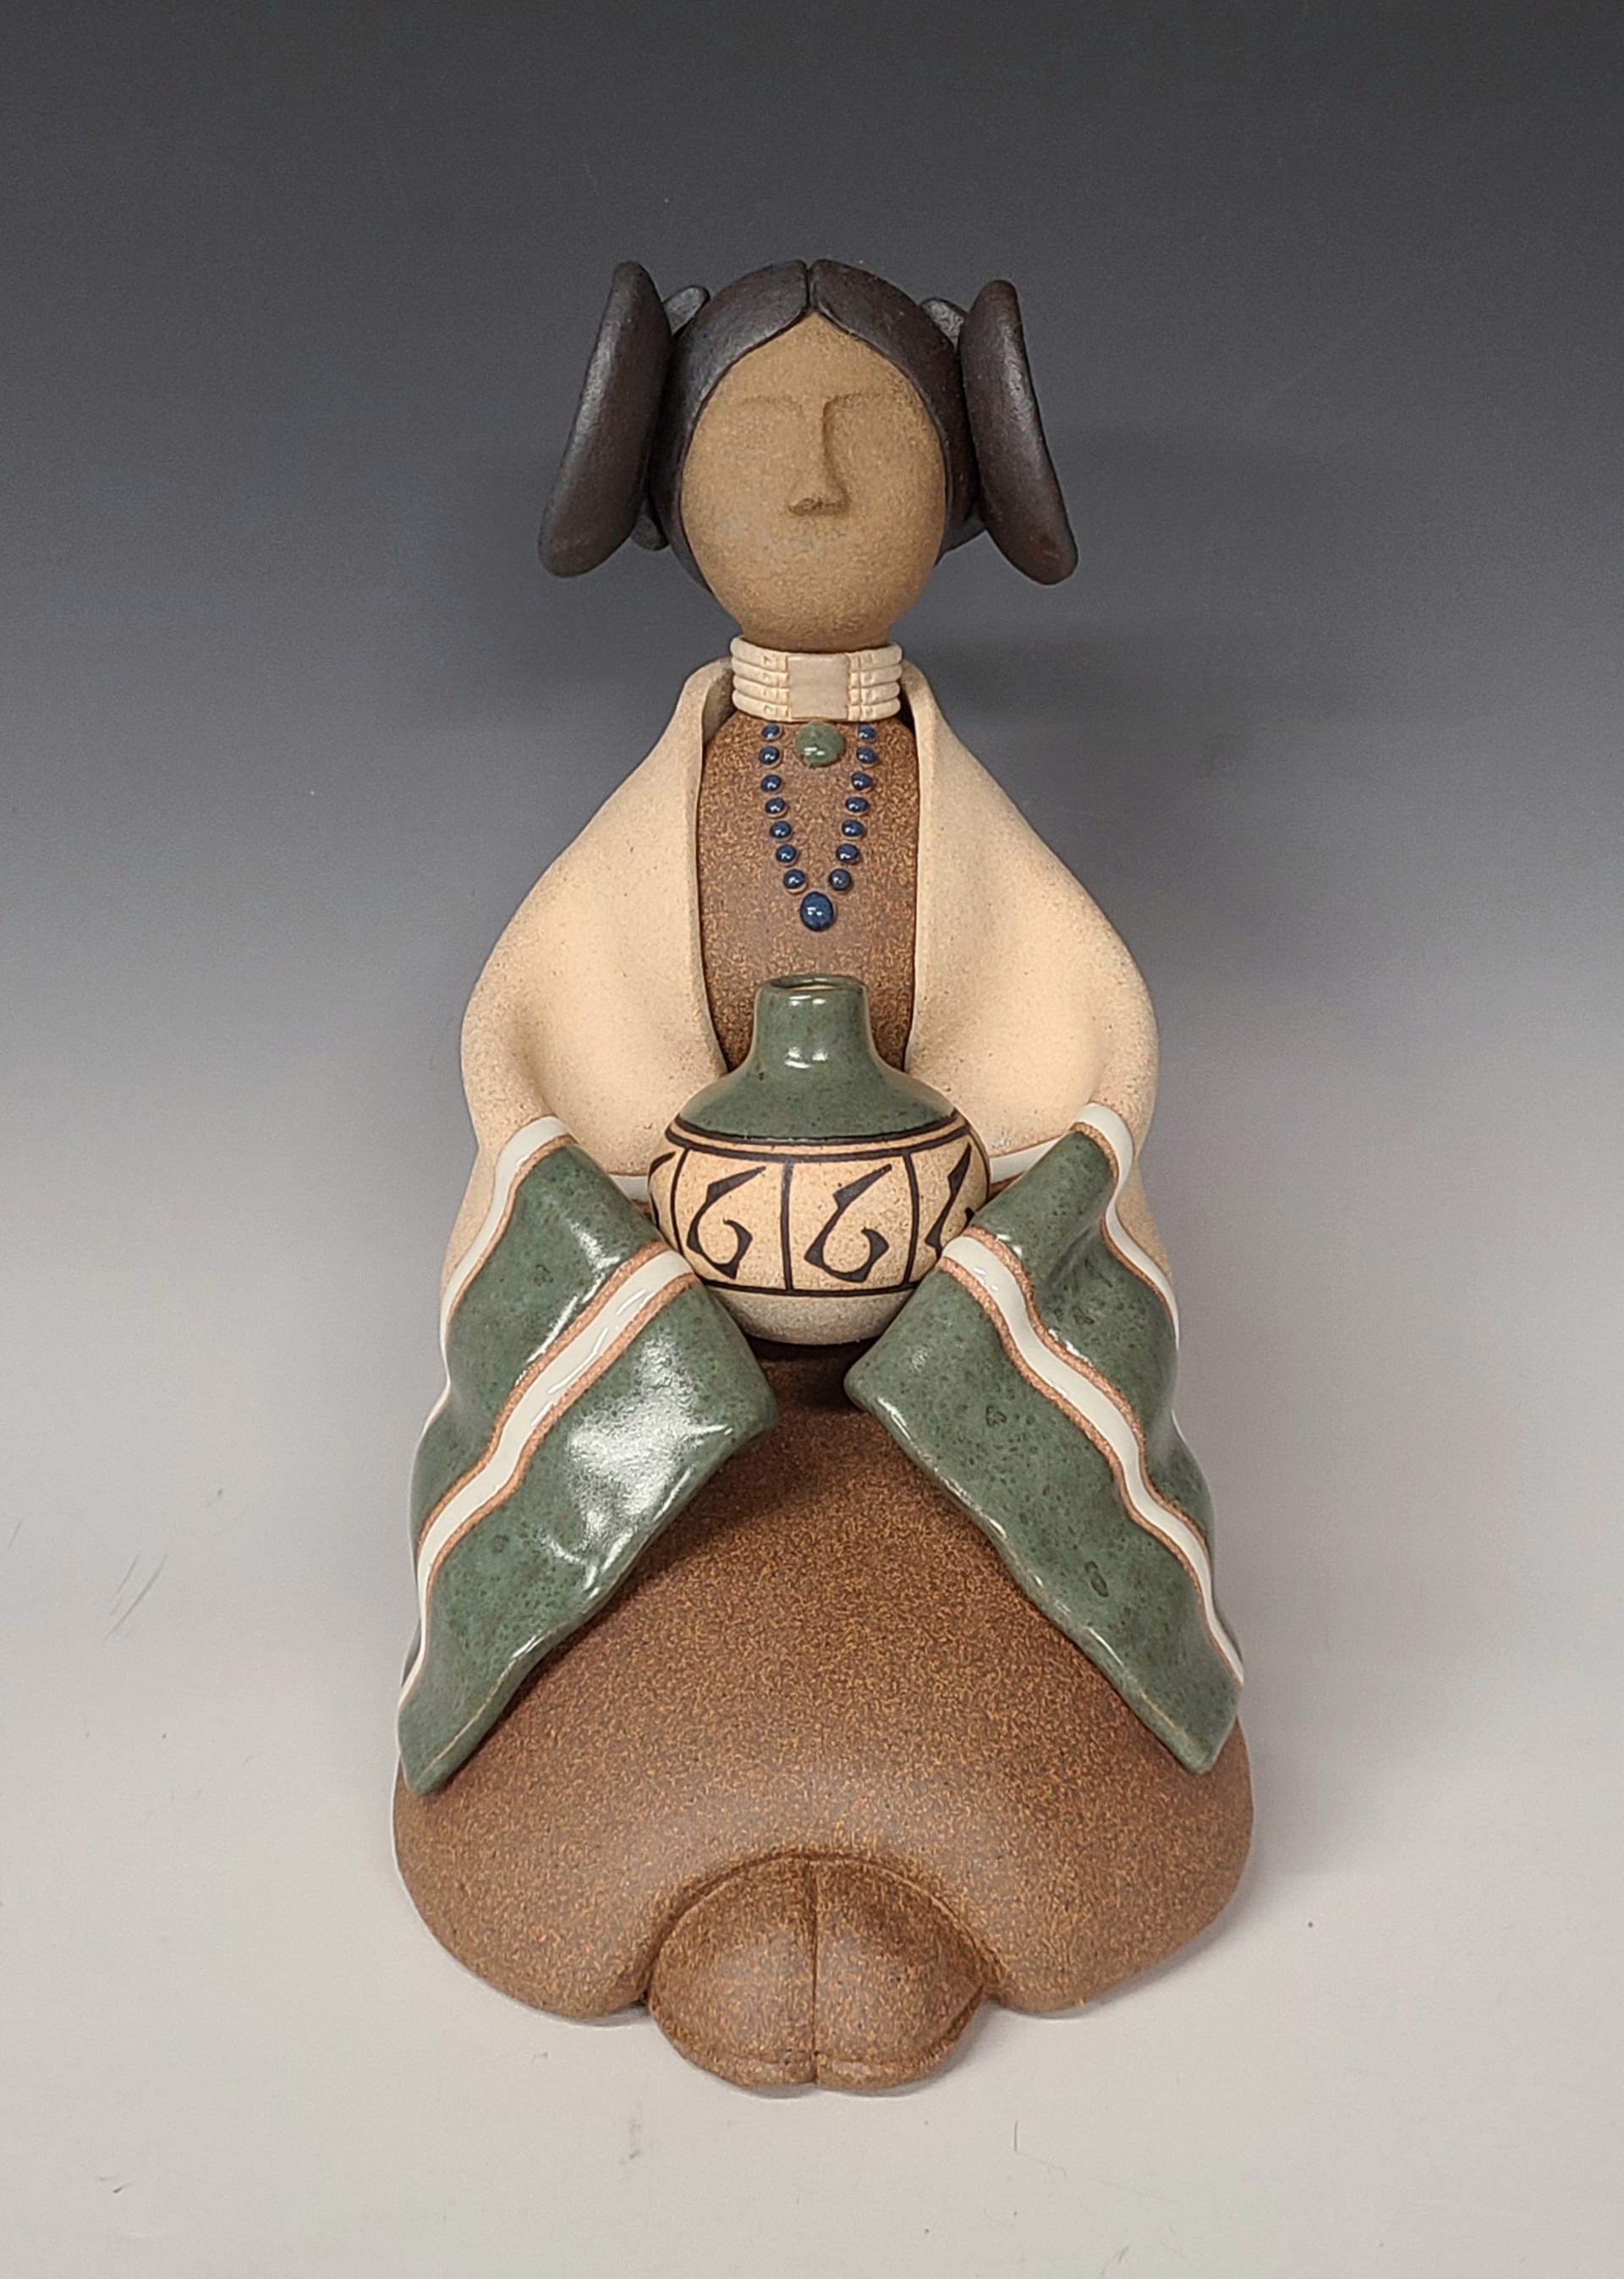 Hopi Maiden Seated-Green by Terry Slonaker